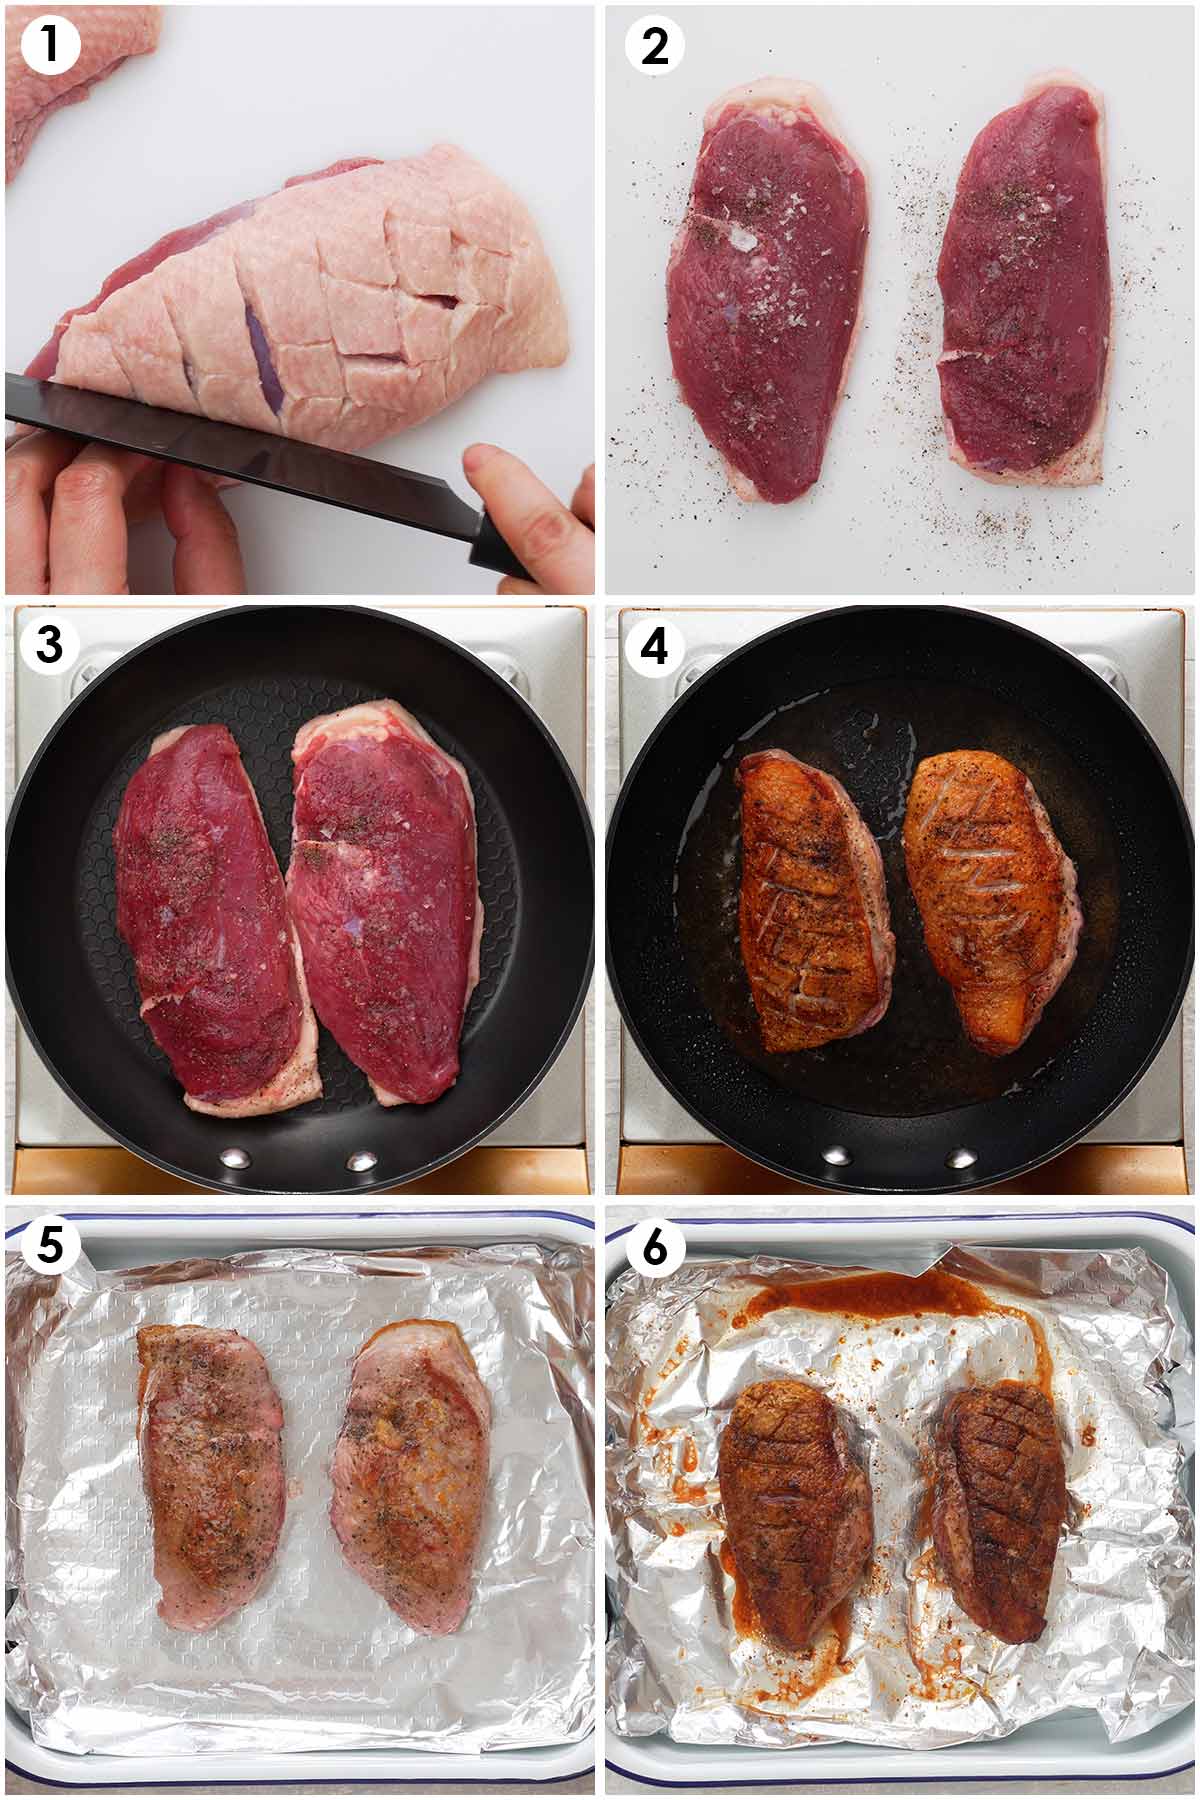 Six image collage showing how to cook duck breast.